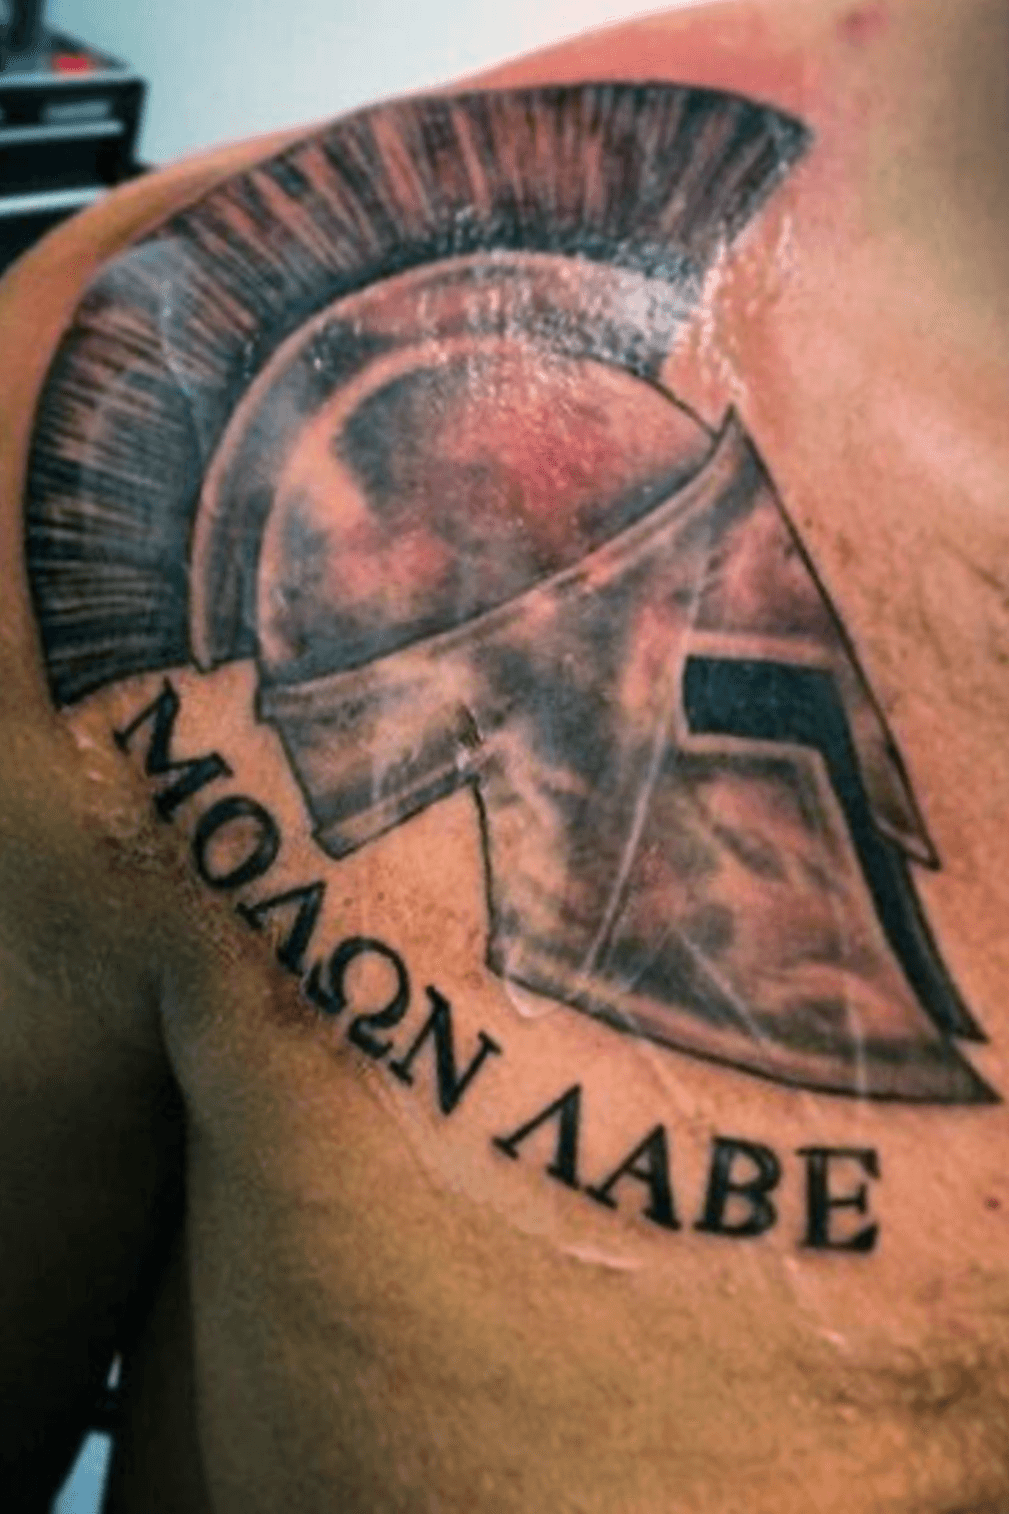 Molon Labe Tattoo Symbolism Meanings  More